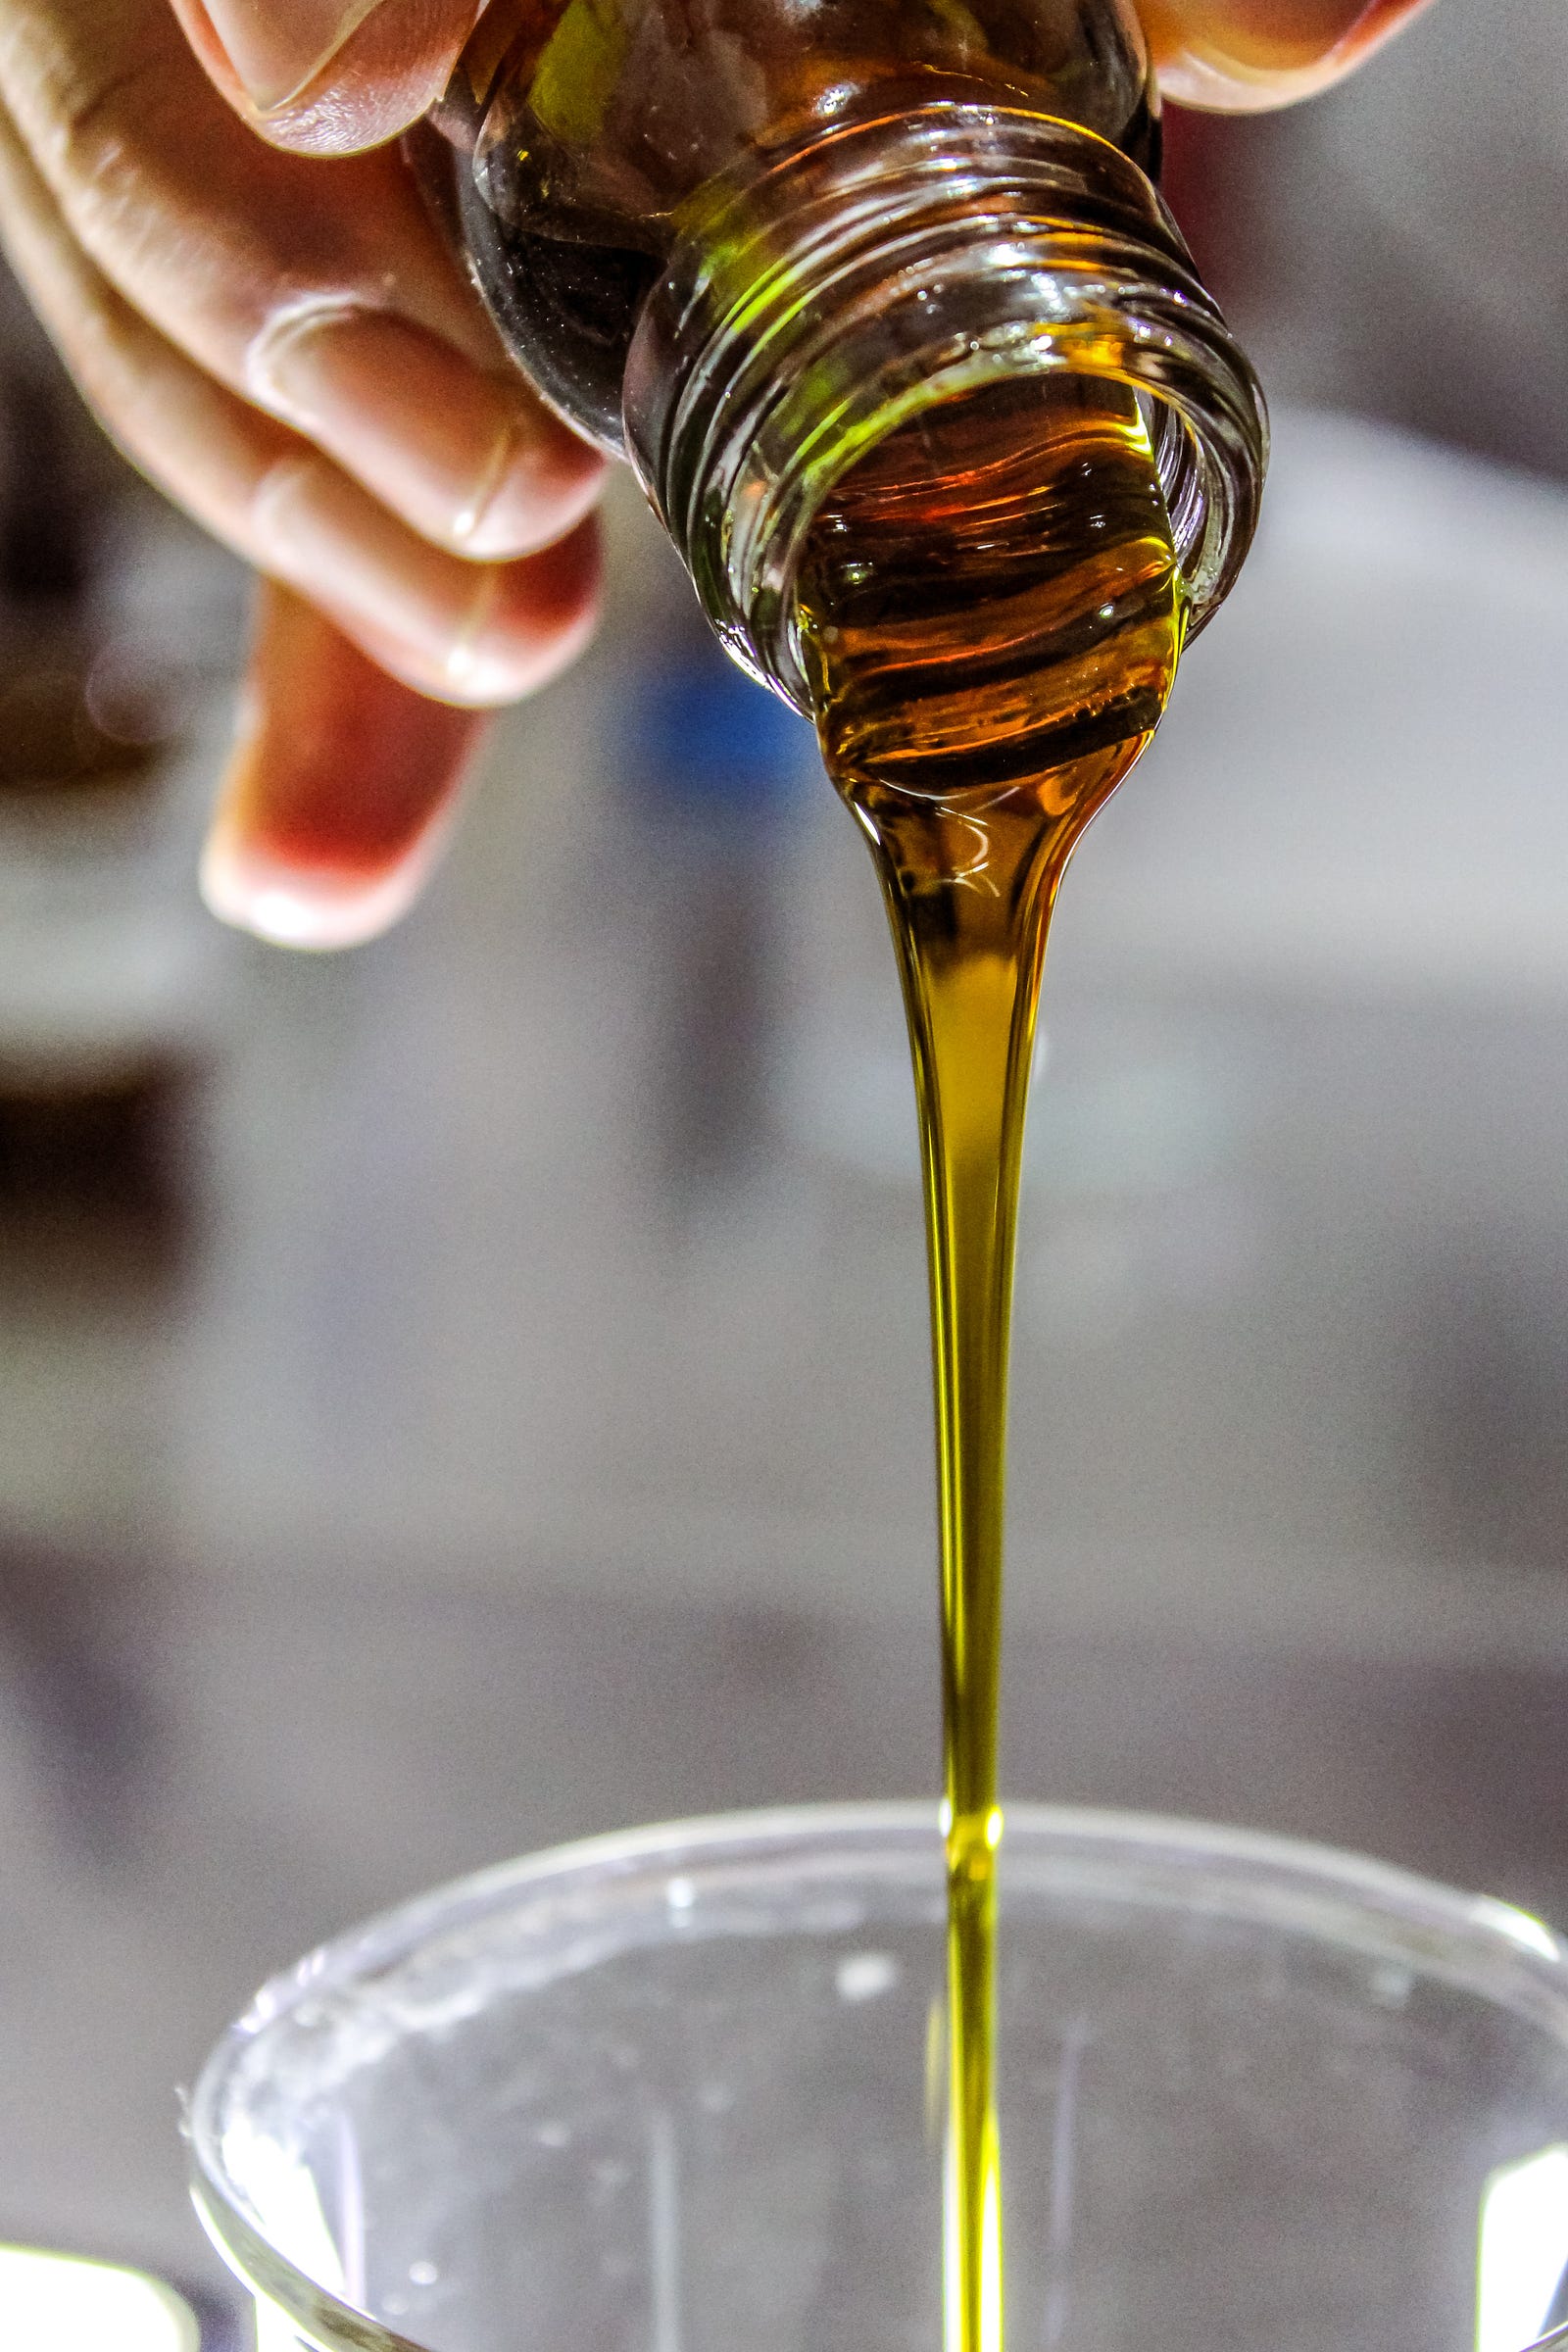 A hand pours olive oil from above into a plastic cup. Here are some healthy fats you should consider: Monosaturated fats (think olive oil, avocados, and some nuts and seeds); polyunsaturated fats (my favorites include walnuts, although I should eat more sunflower seeds, fish, and flax.